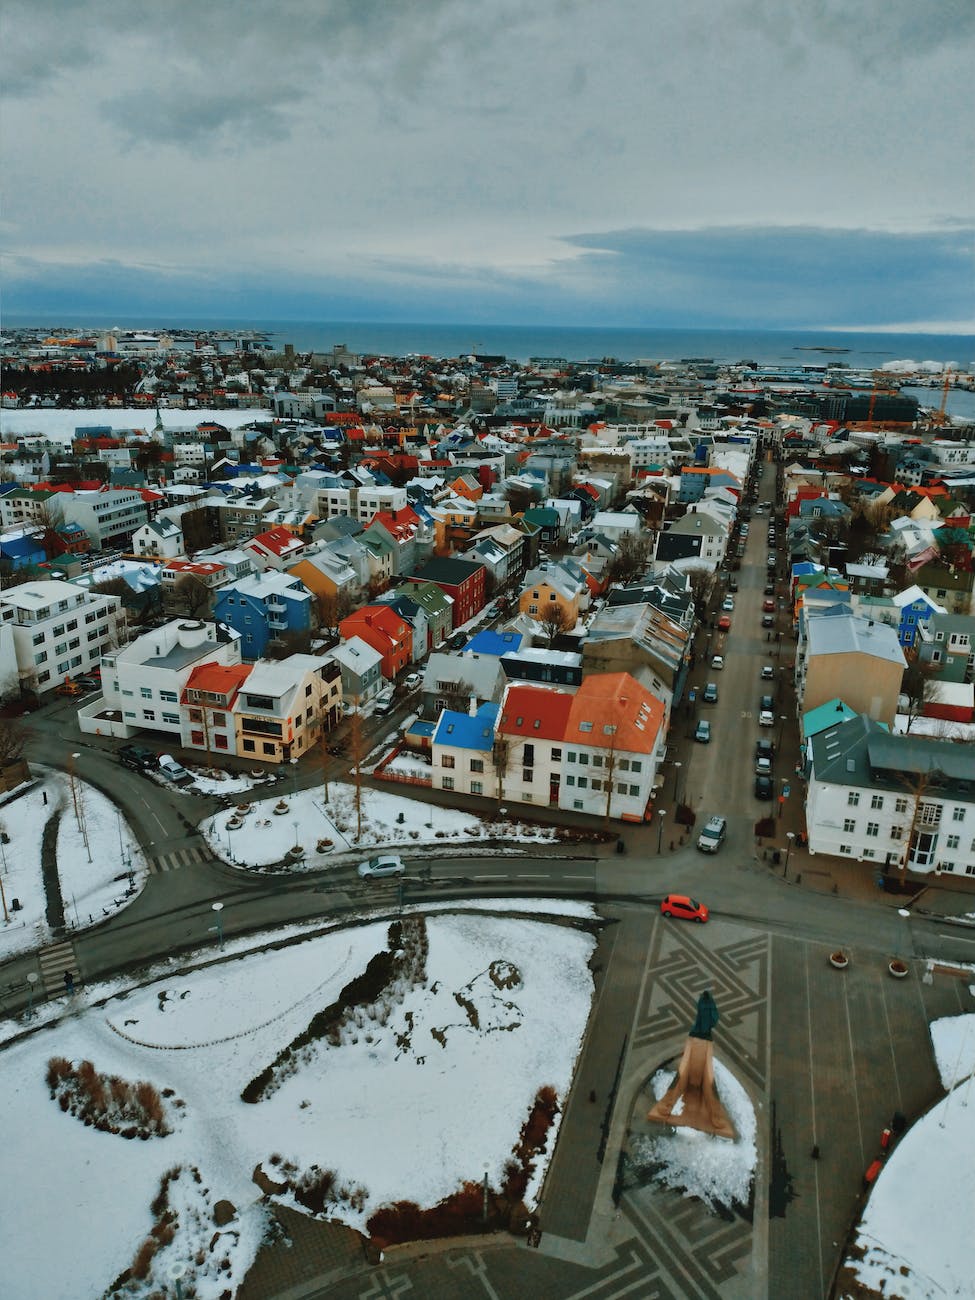 scenery of streets and buildings of snowy reykjavik